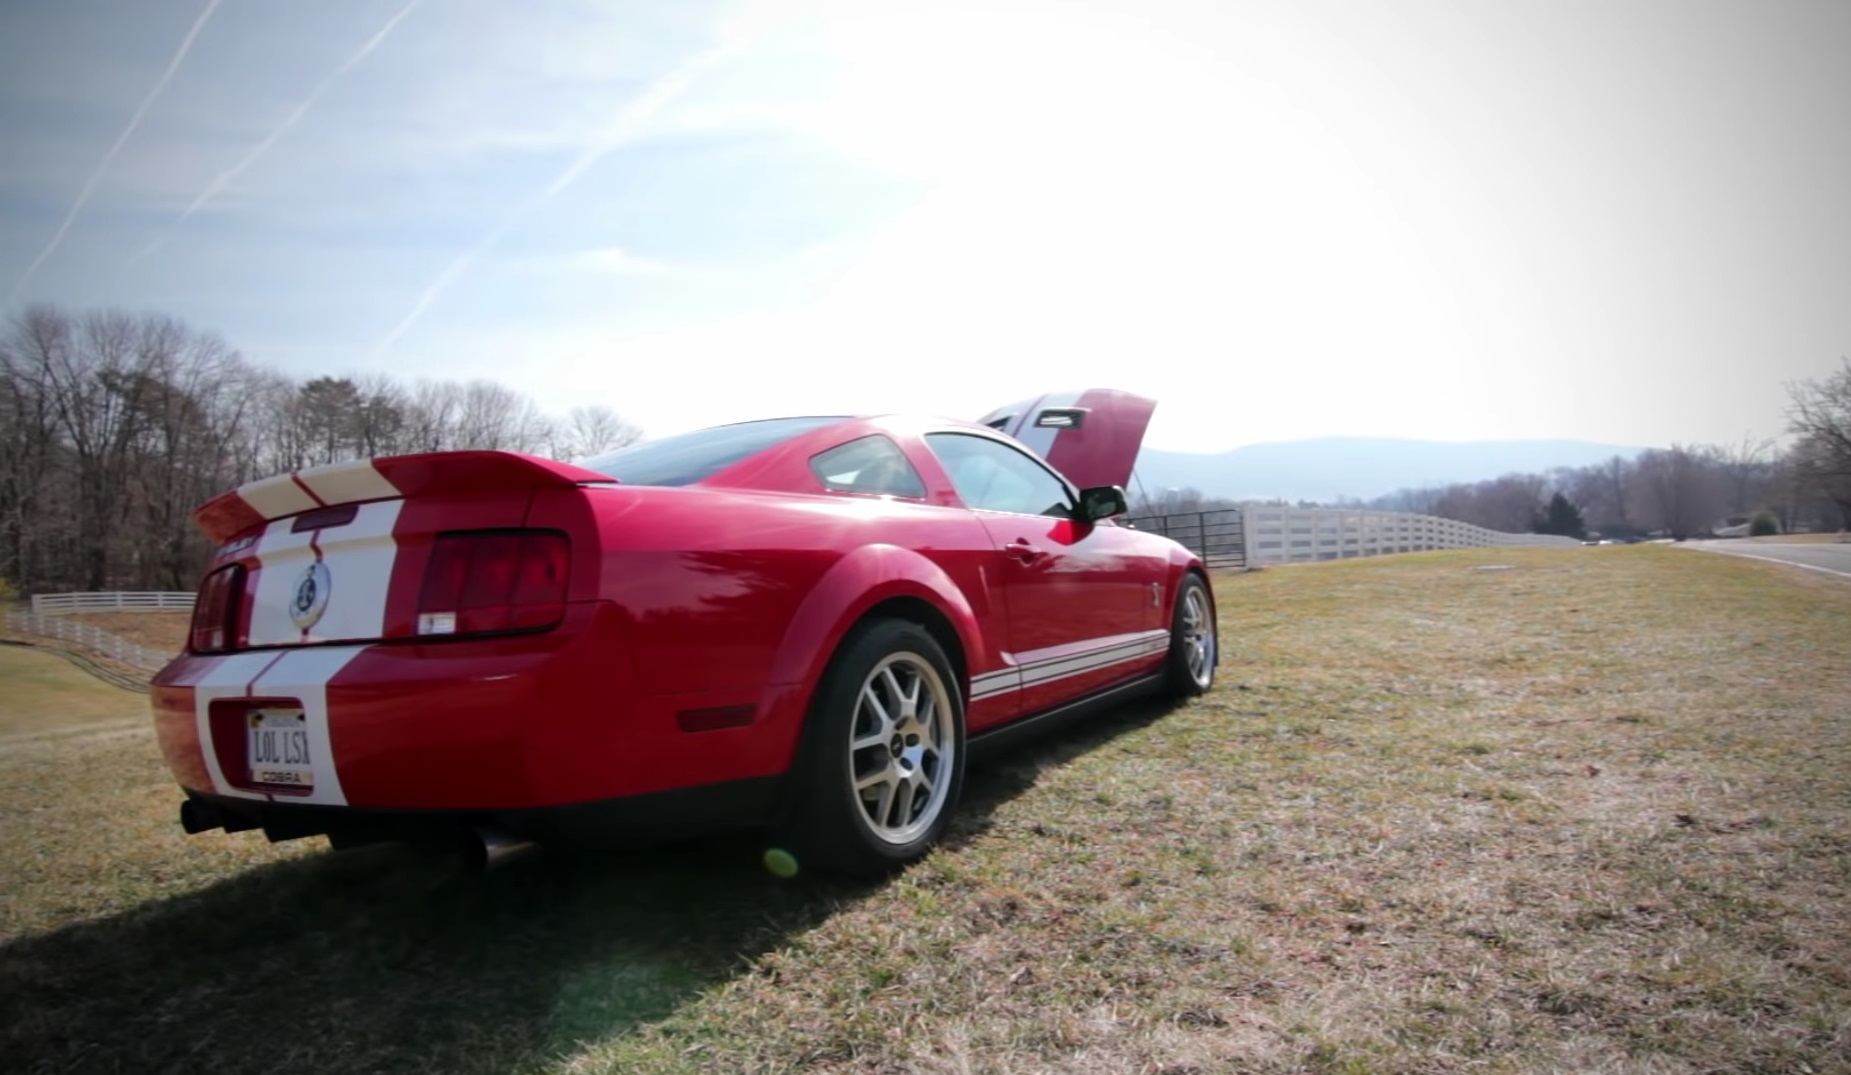 Video: 2007 Ford Mustang Shelby GT-500 In-Depth Review